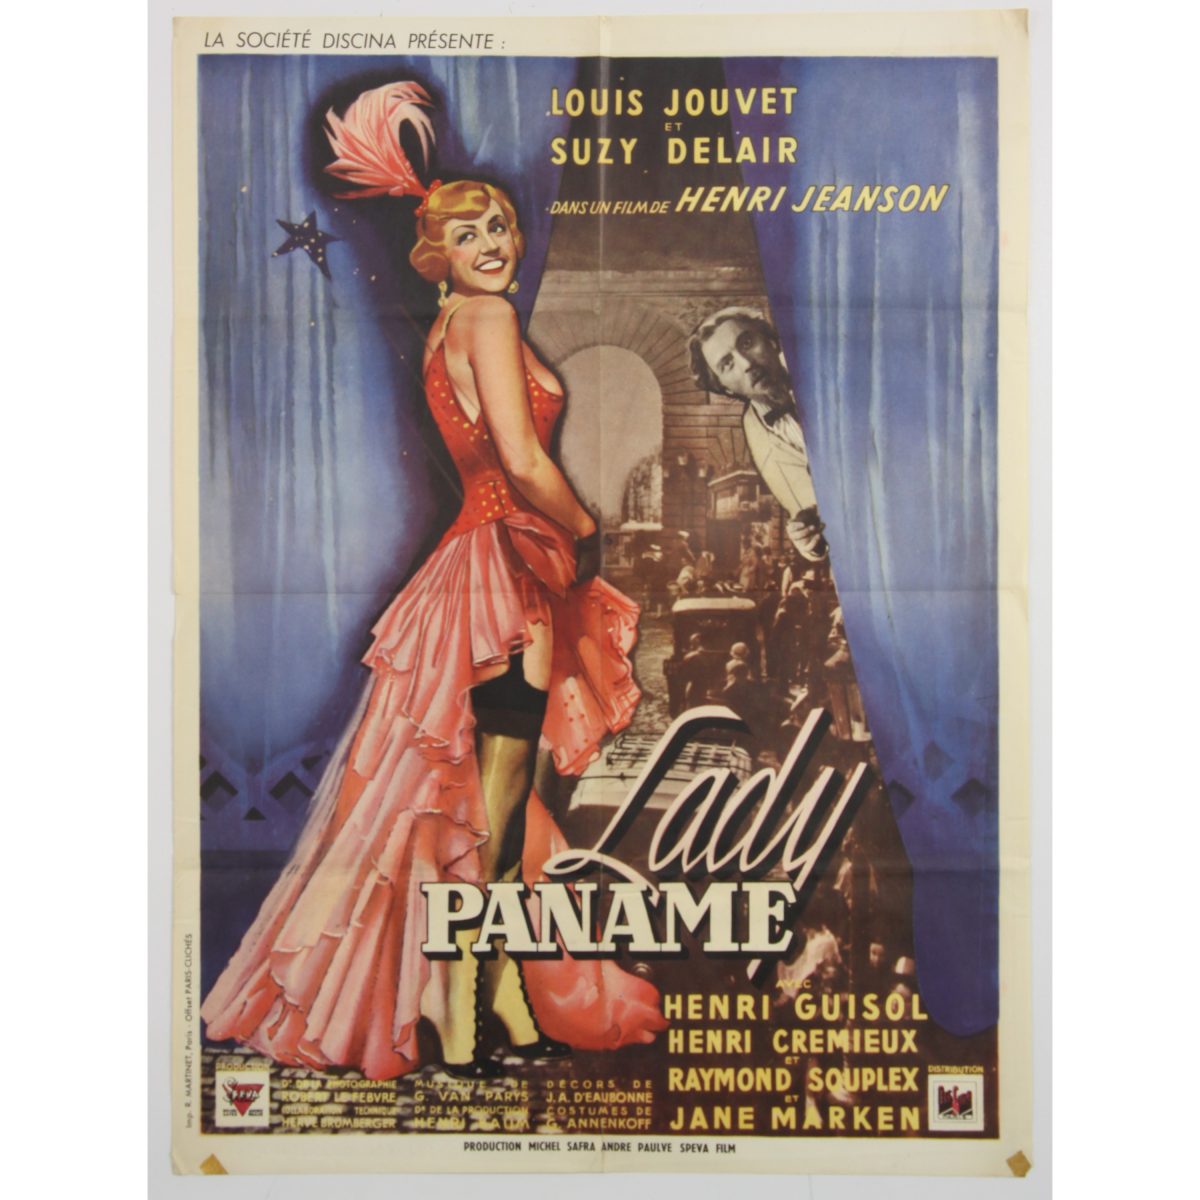 Movie poster lady-paname-mo-fr